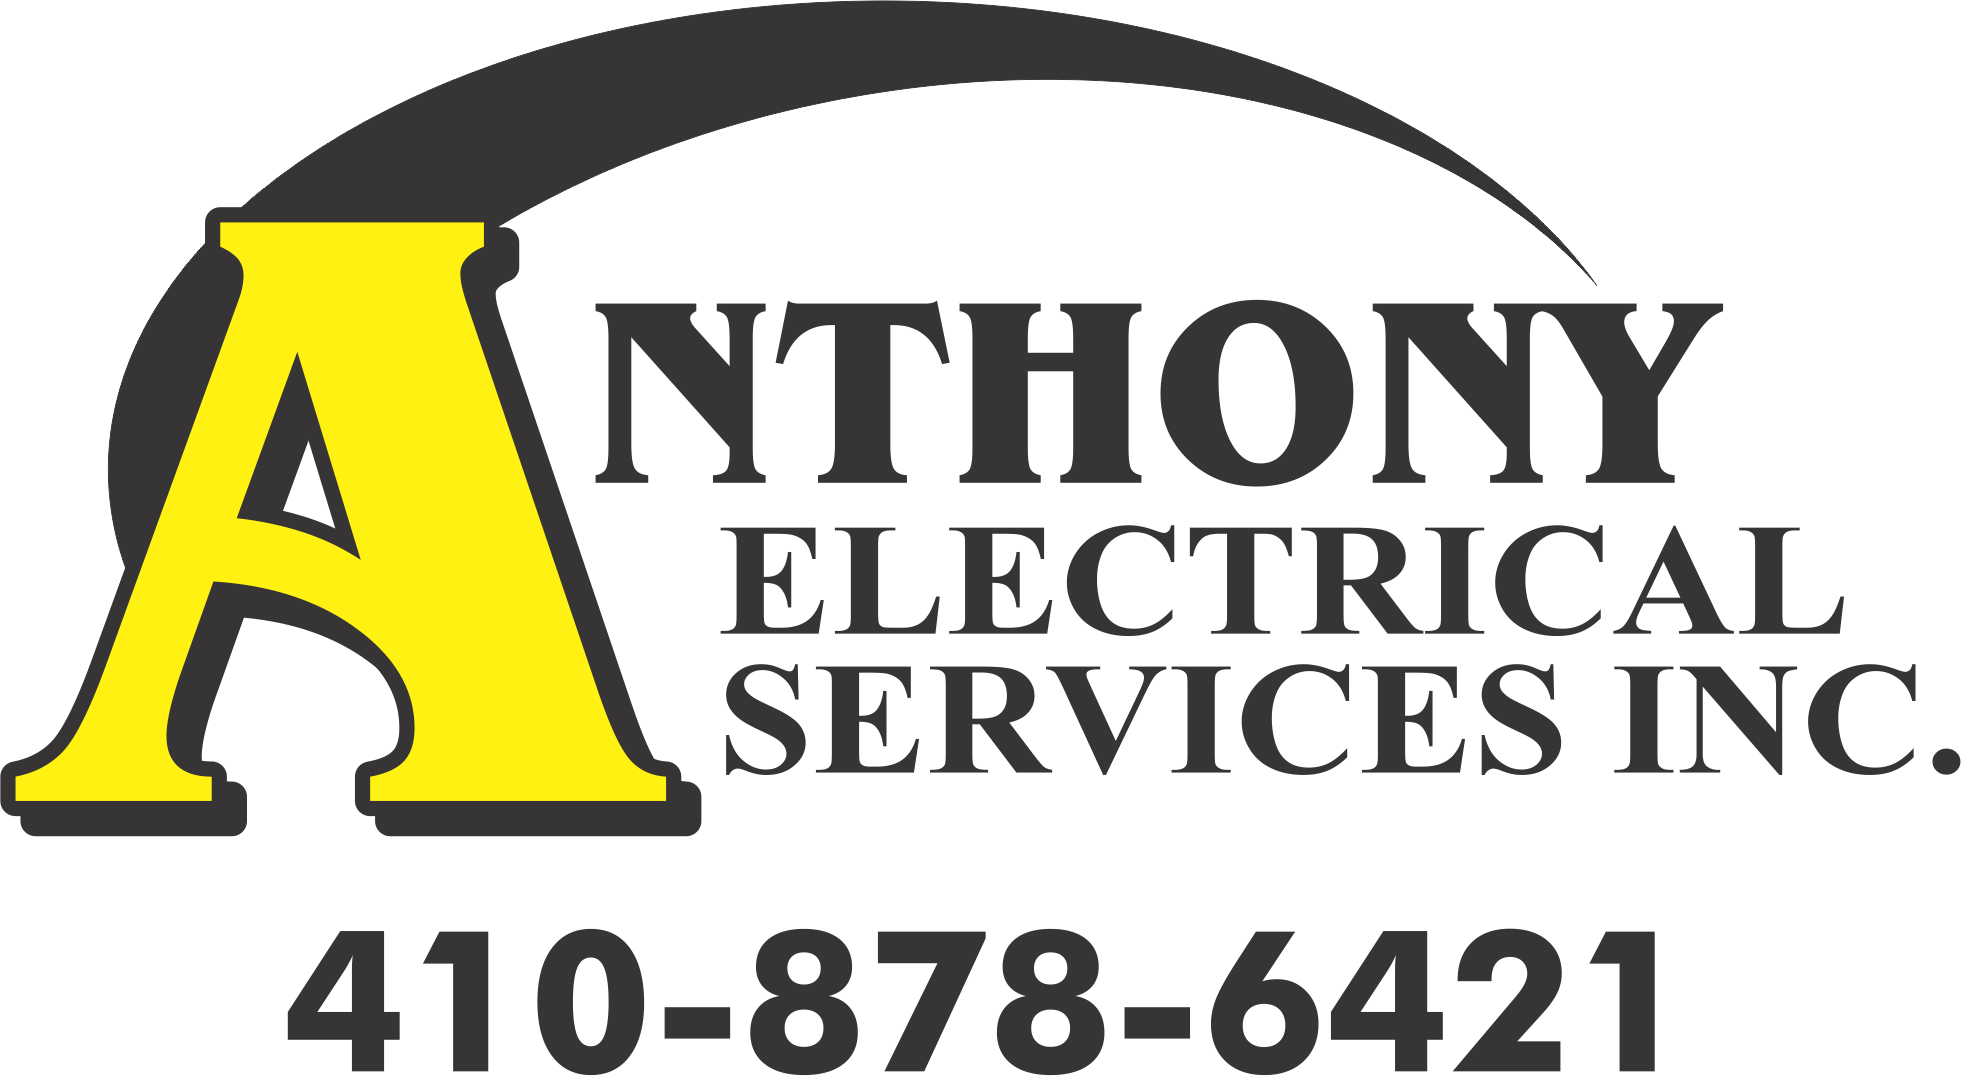 Anthony's Electrical Services